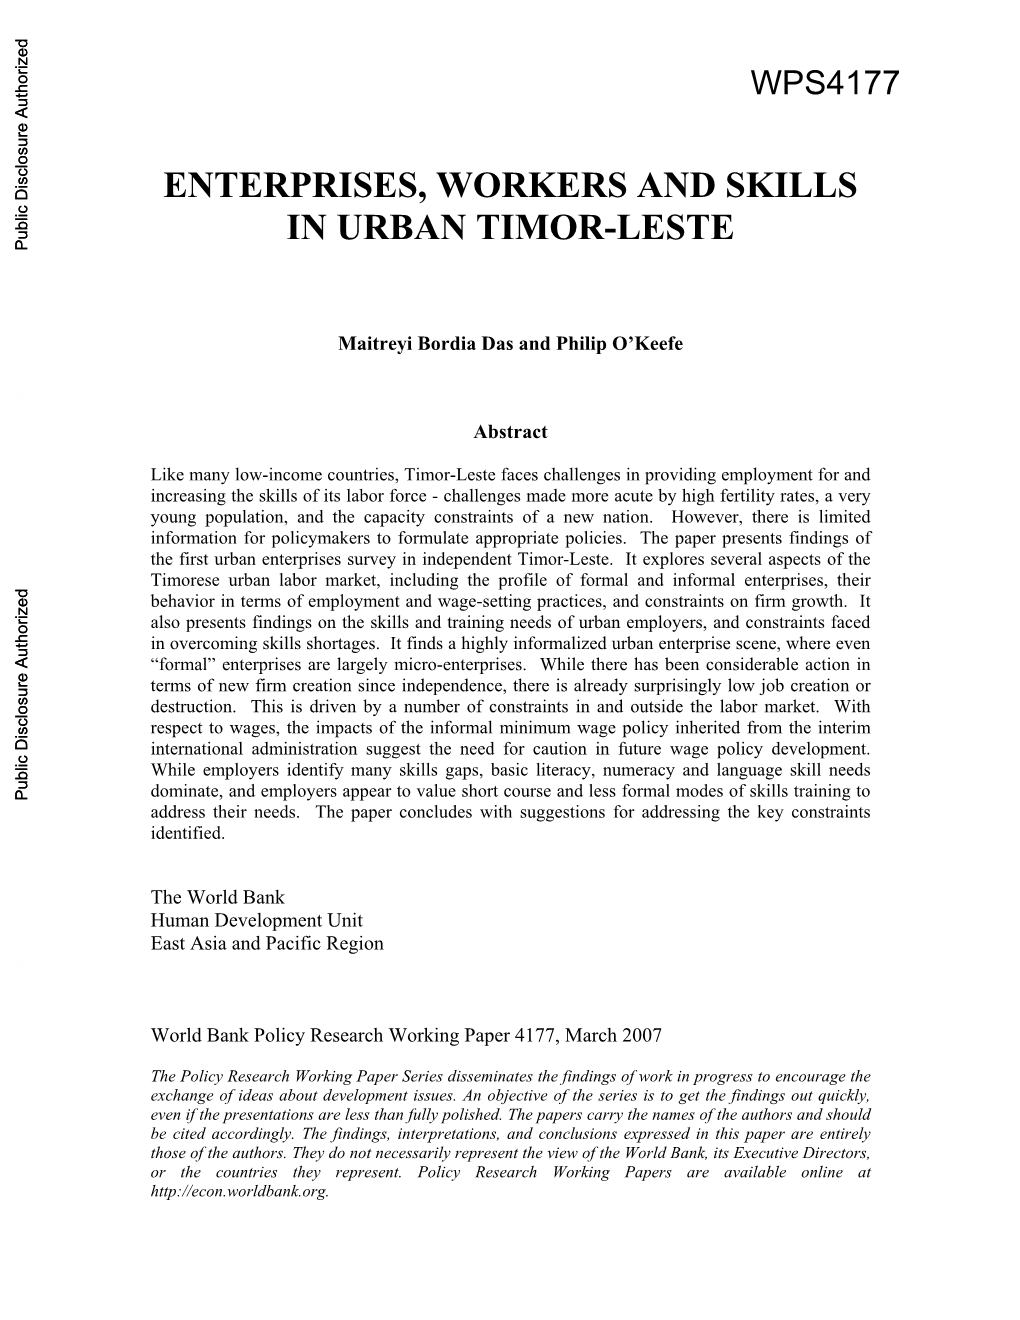 ENTERPRISES, WORKERS and SKILLS in URBAN TIMOR-LESTE Public Disclosure Authorized